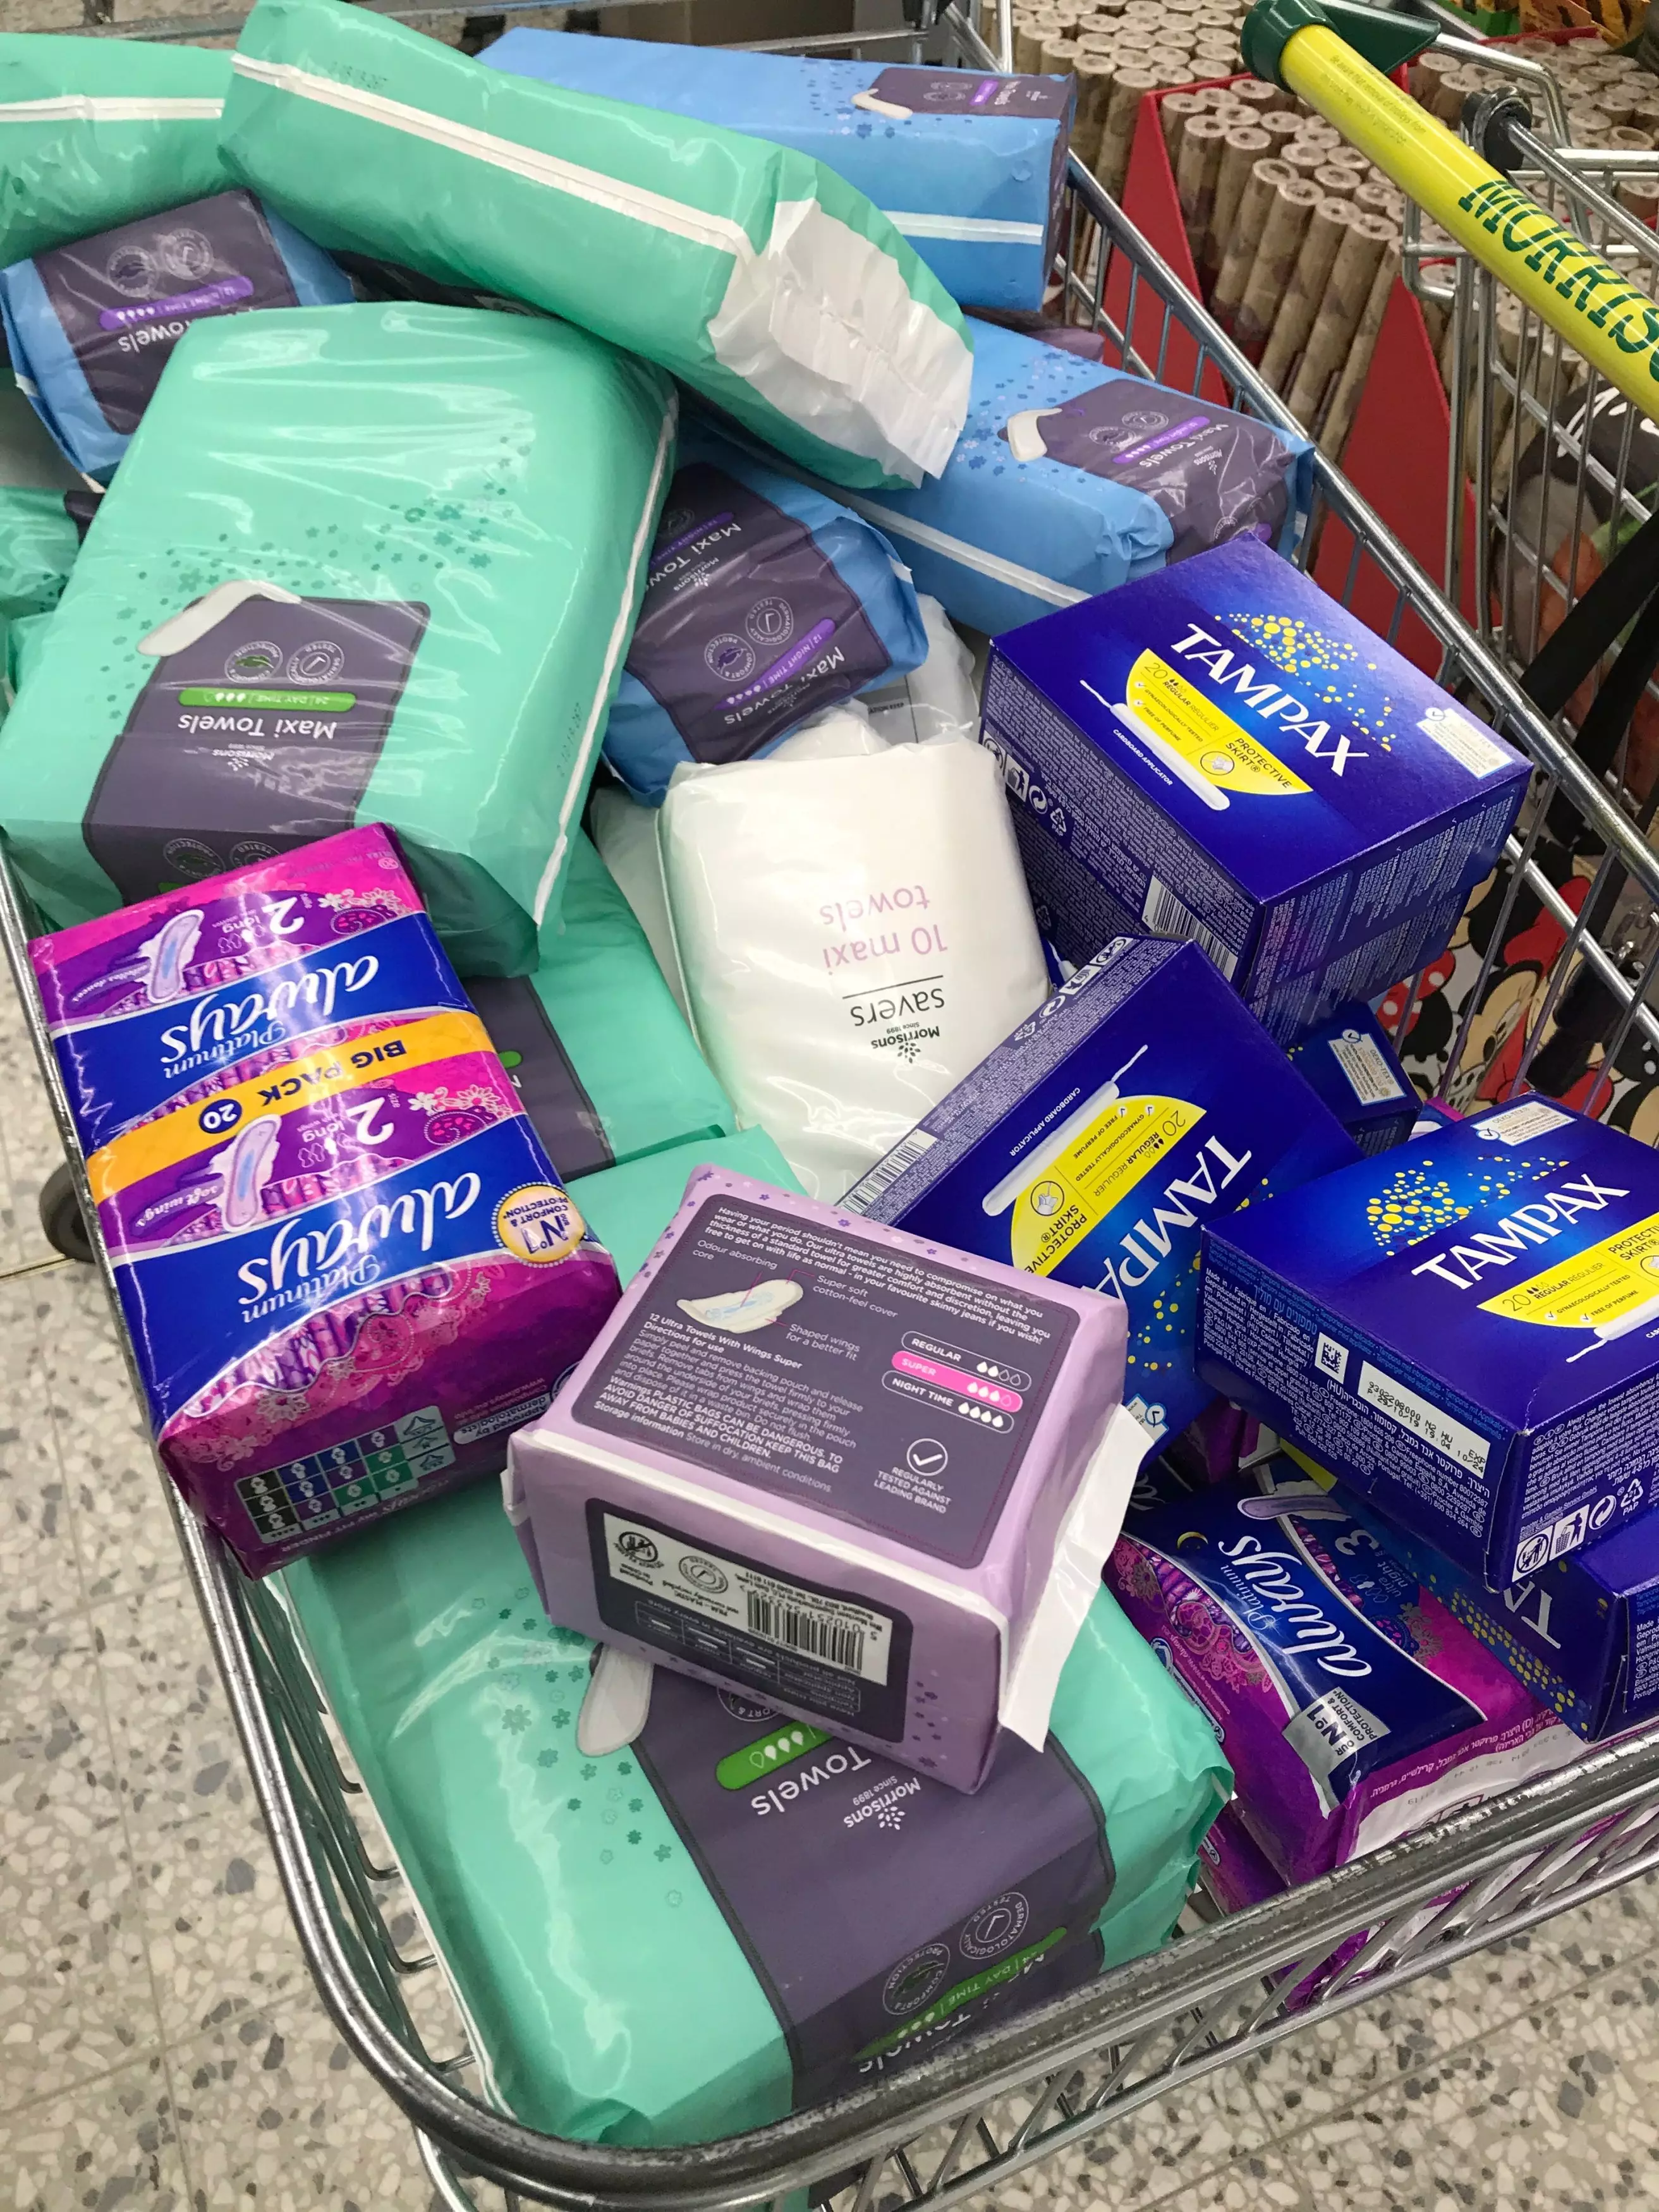 Jeff Williams loaded up his trolley with sanitary products on a recent trip to Morrisons (